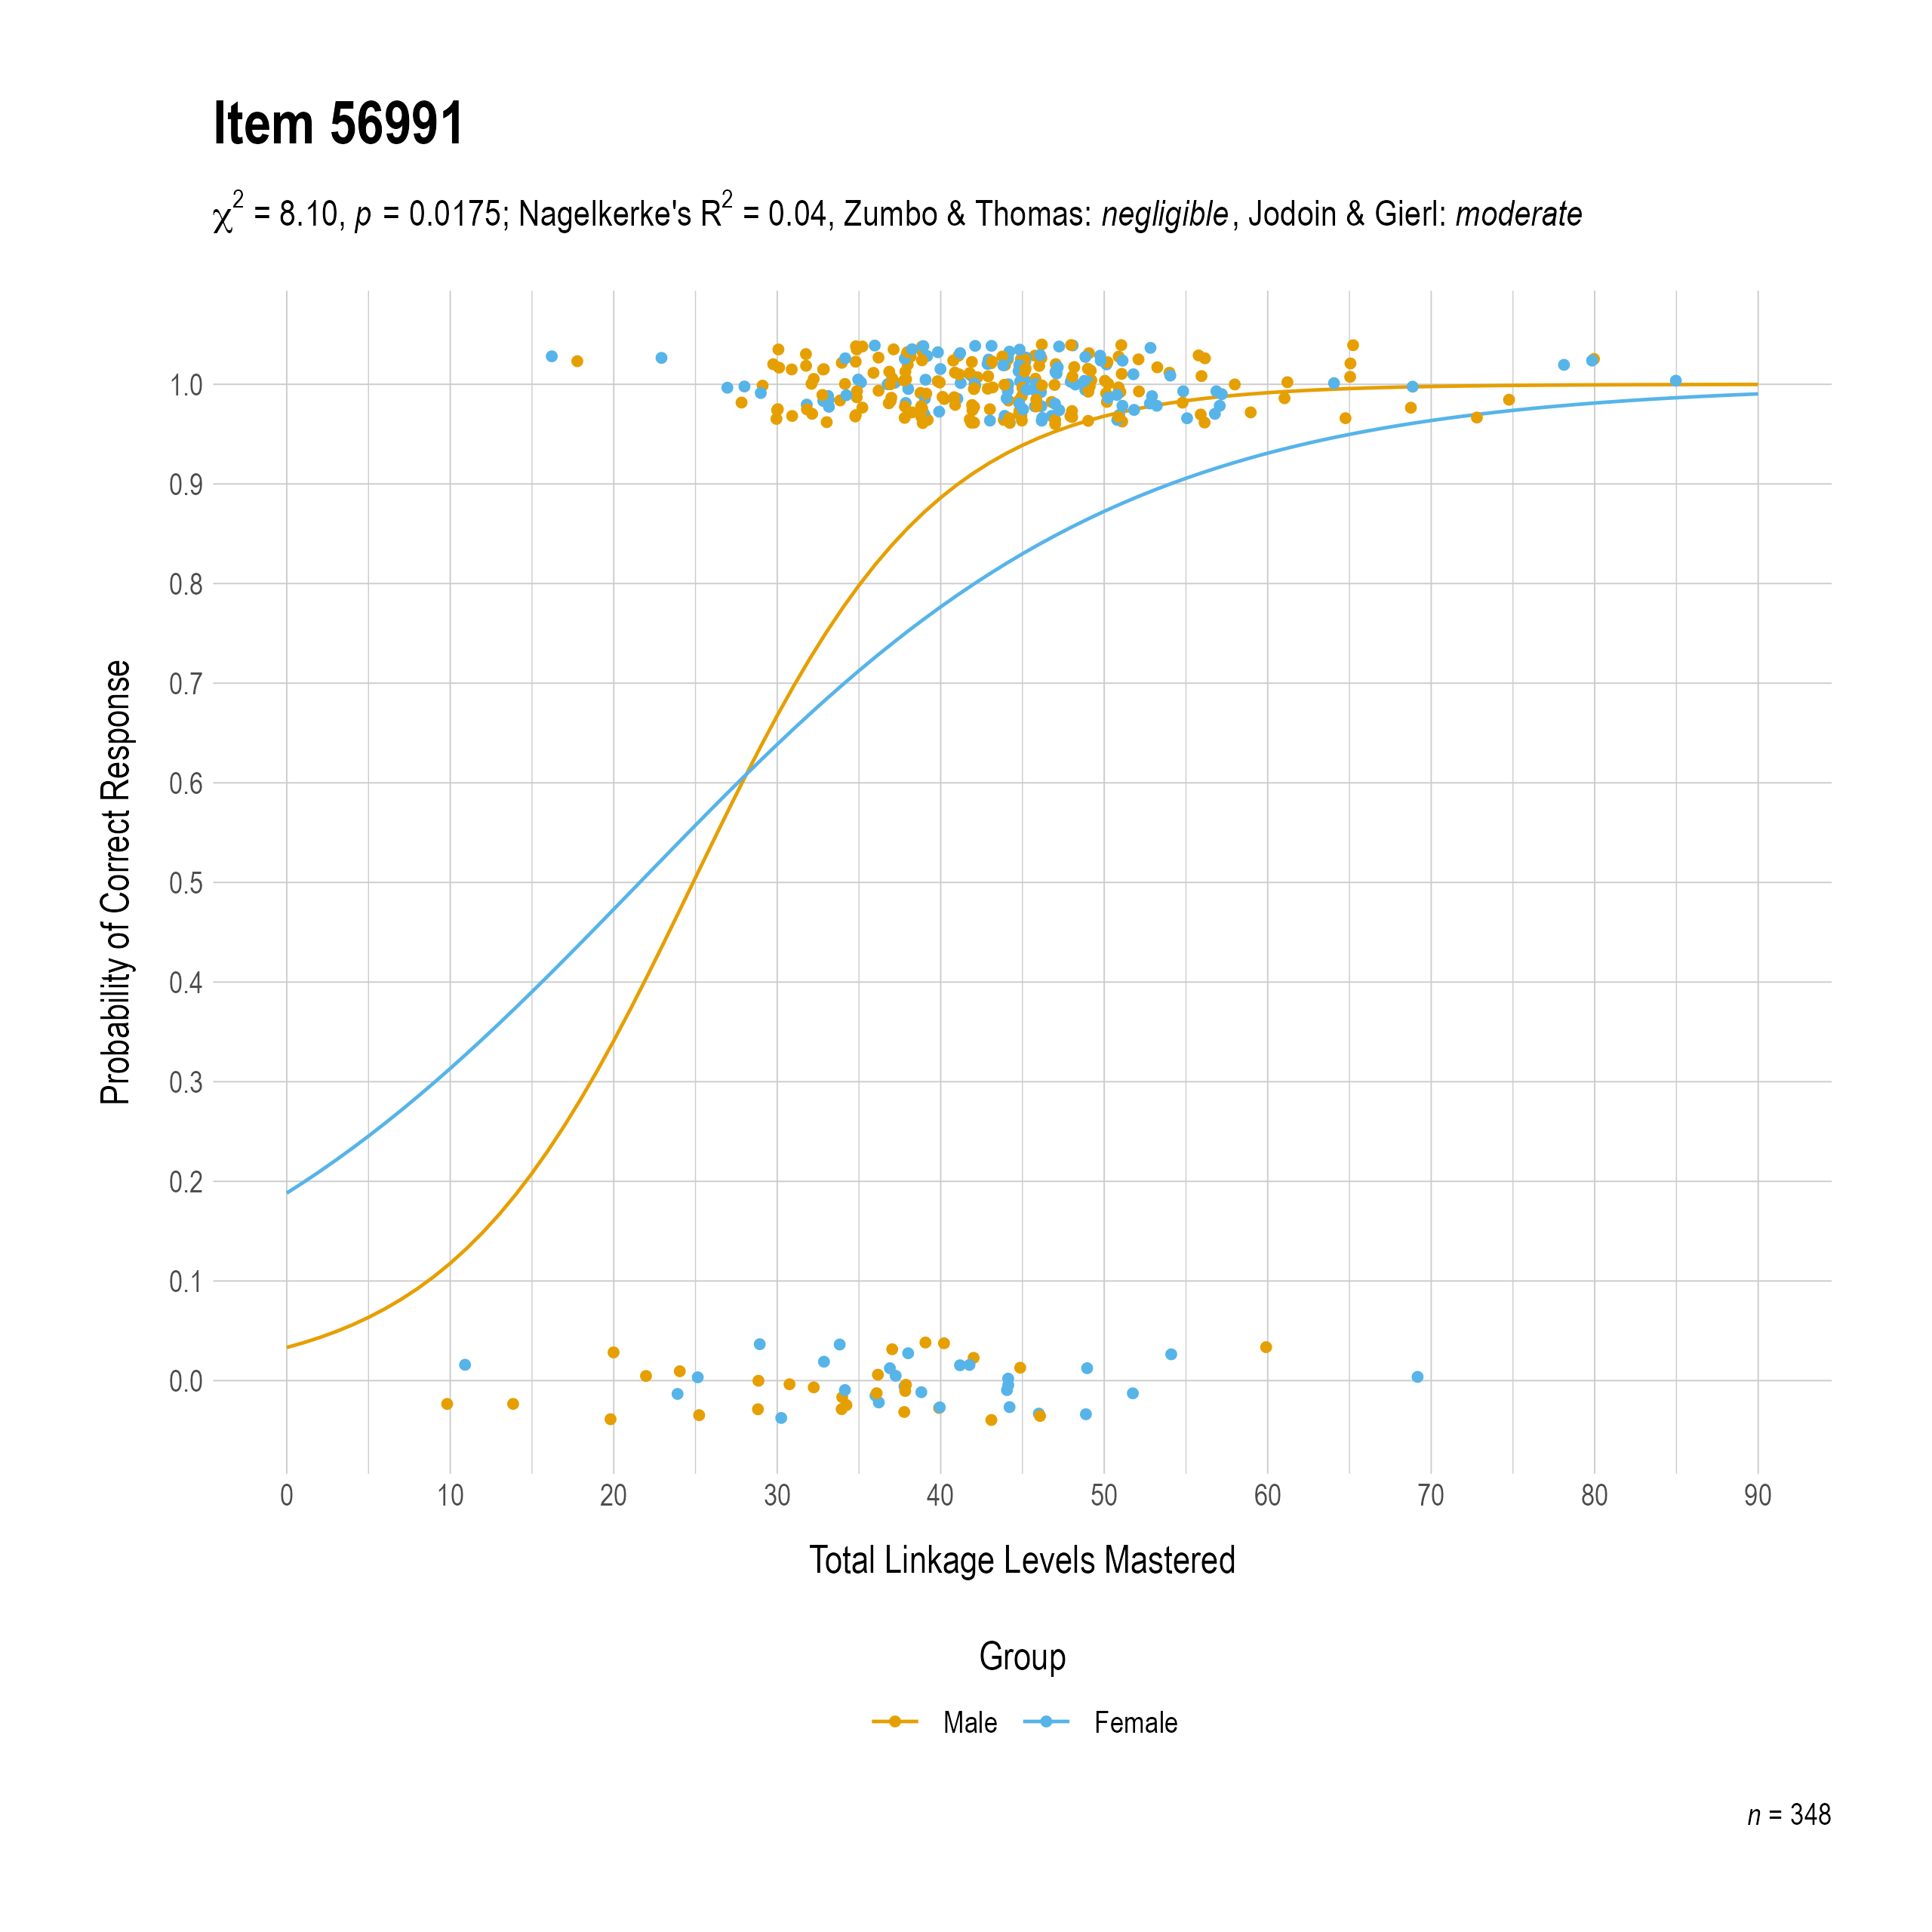 The plot of the combined gender differential item function evidence for English language arts item 56991. The figure contains points shaded by group. The figure also contains a logistic regression curve for each group. The total linkage levels mastered in is on the x-axis, and the probability of a correct response is on the y-axis.